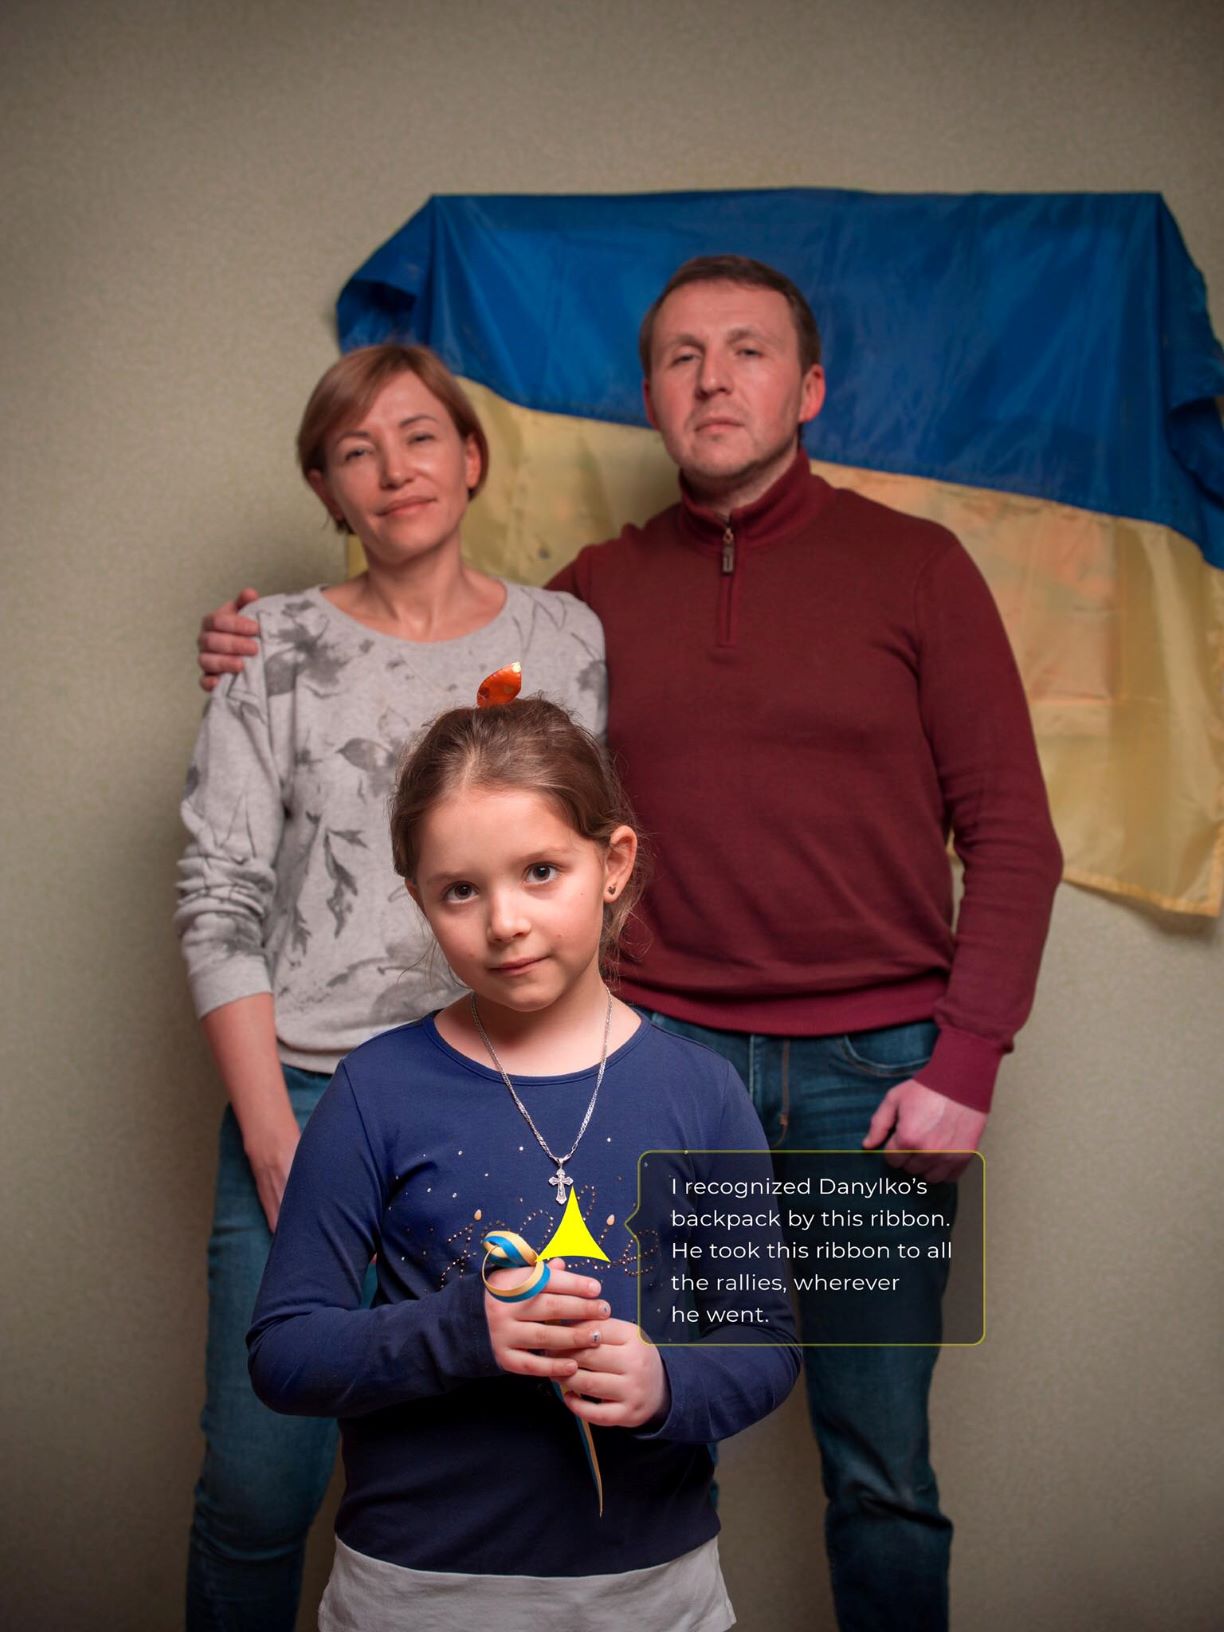 “Danya showed his determination… He chose Ukraine,” do not forget Danylo Didik, killed by pro Russian terrorists